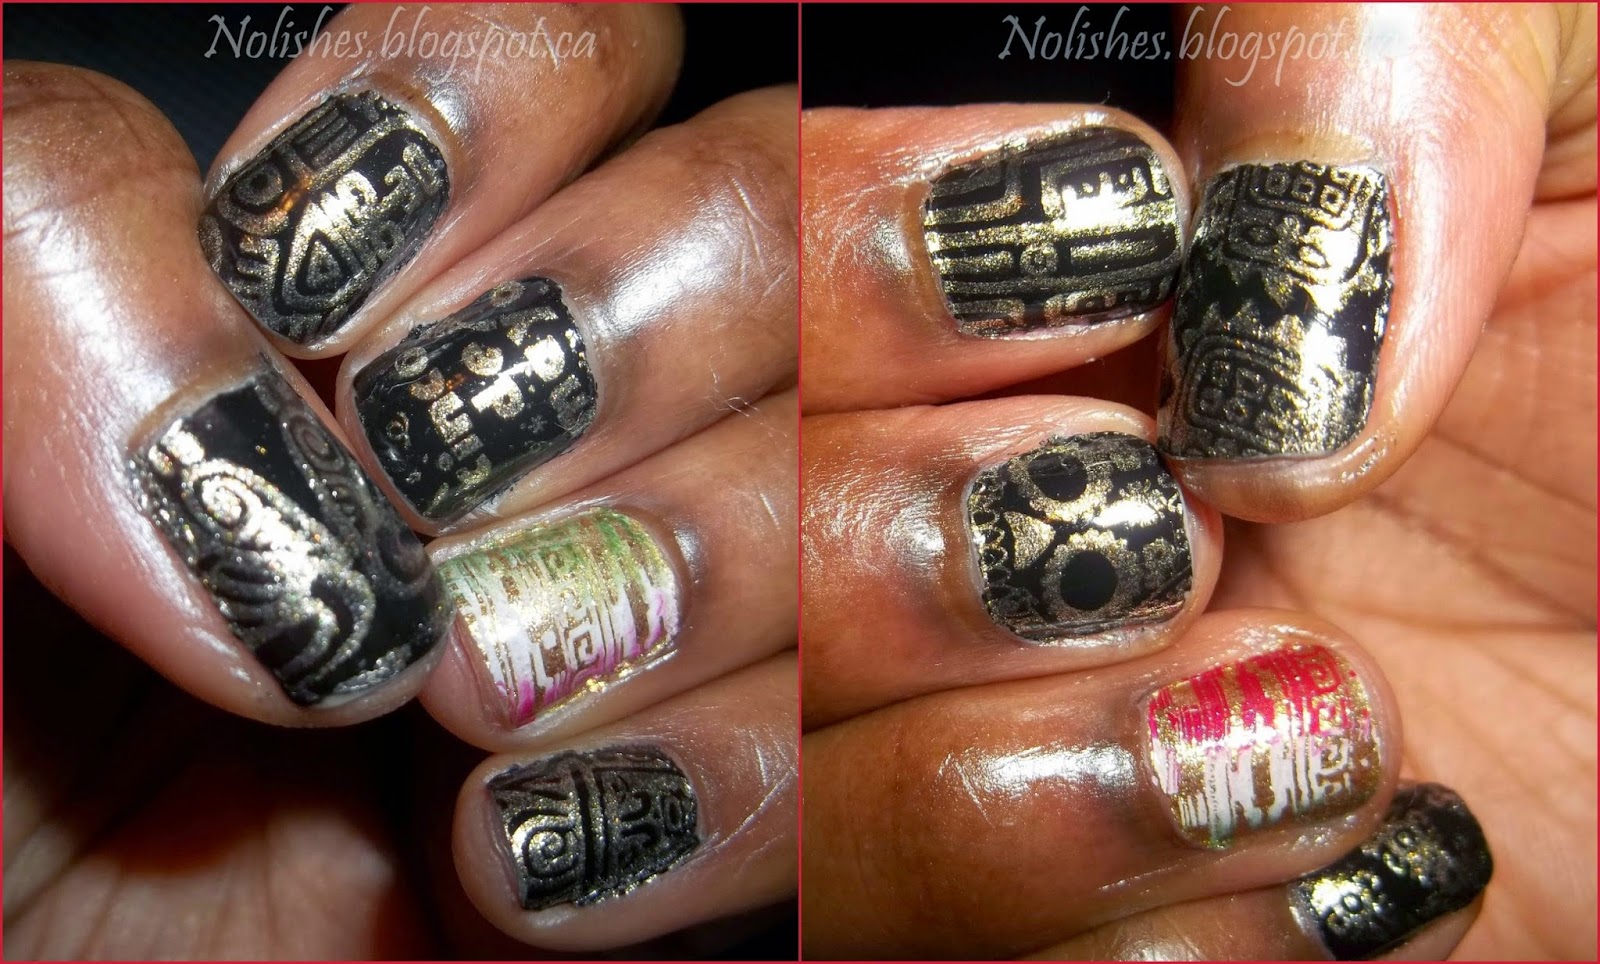 Cinco de Mayo Nail Stamping Manicure in Black, Gold, Red, White and Green. Stamped using Cheeky's Jumbo Plate 1 'Viva Mexico', and Moyou London's Pro XL Collection plate 06.